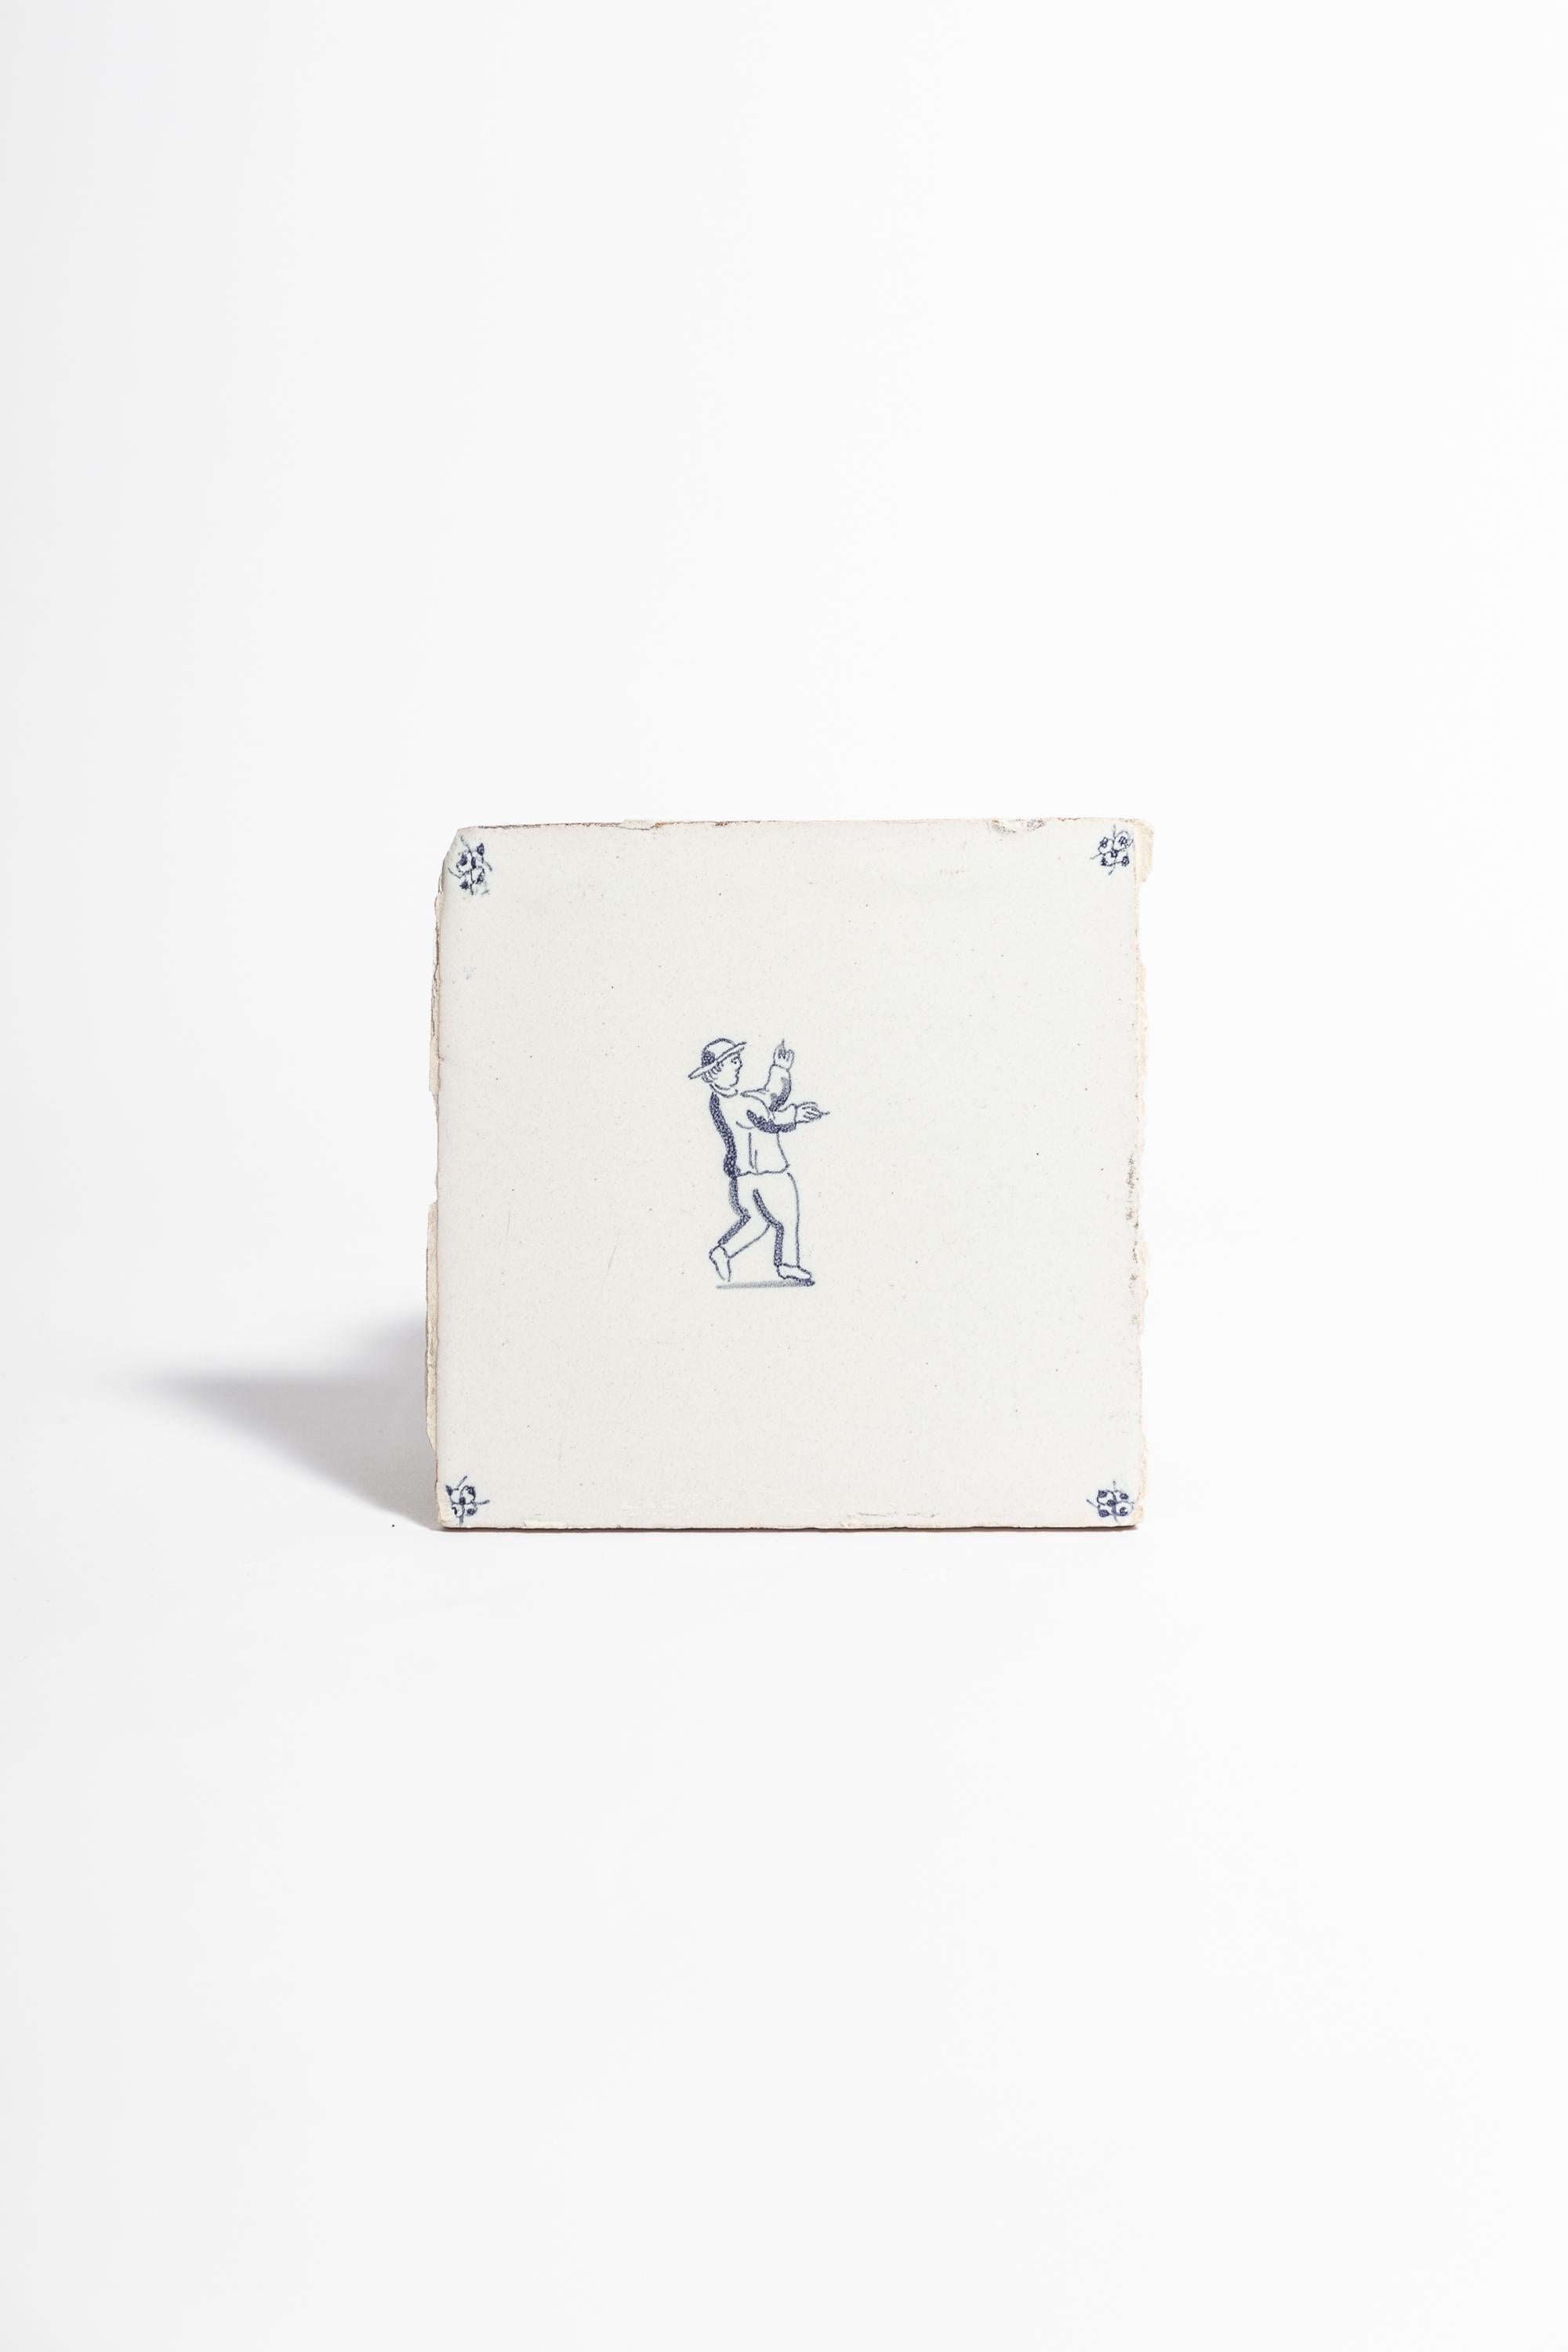 19th century delft tile.

Antique delft tile painted with central figure waving his hands and decoration in each corner. 

Dimensions: 13.5 cm x 13.5 cm.